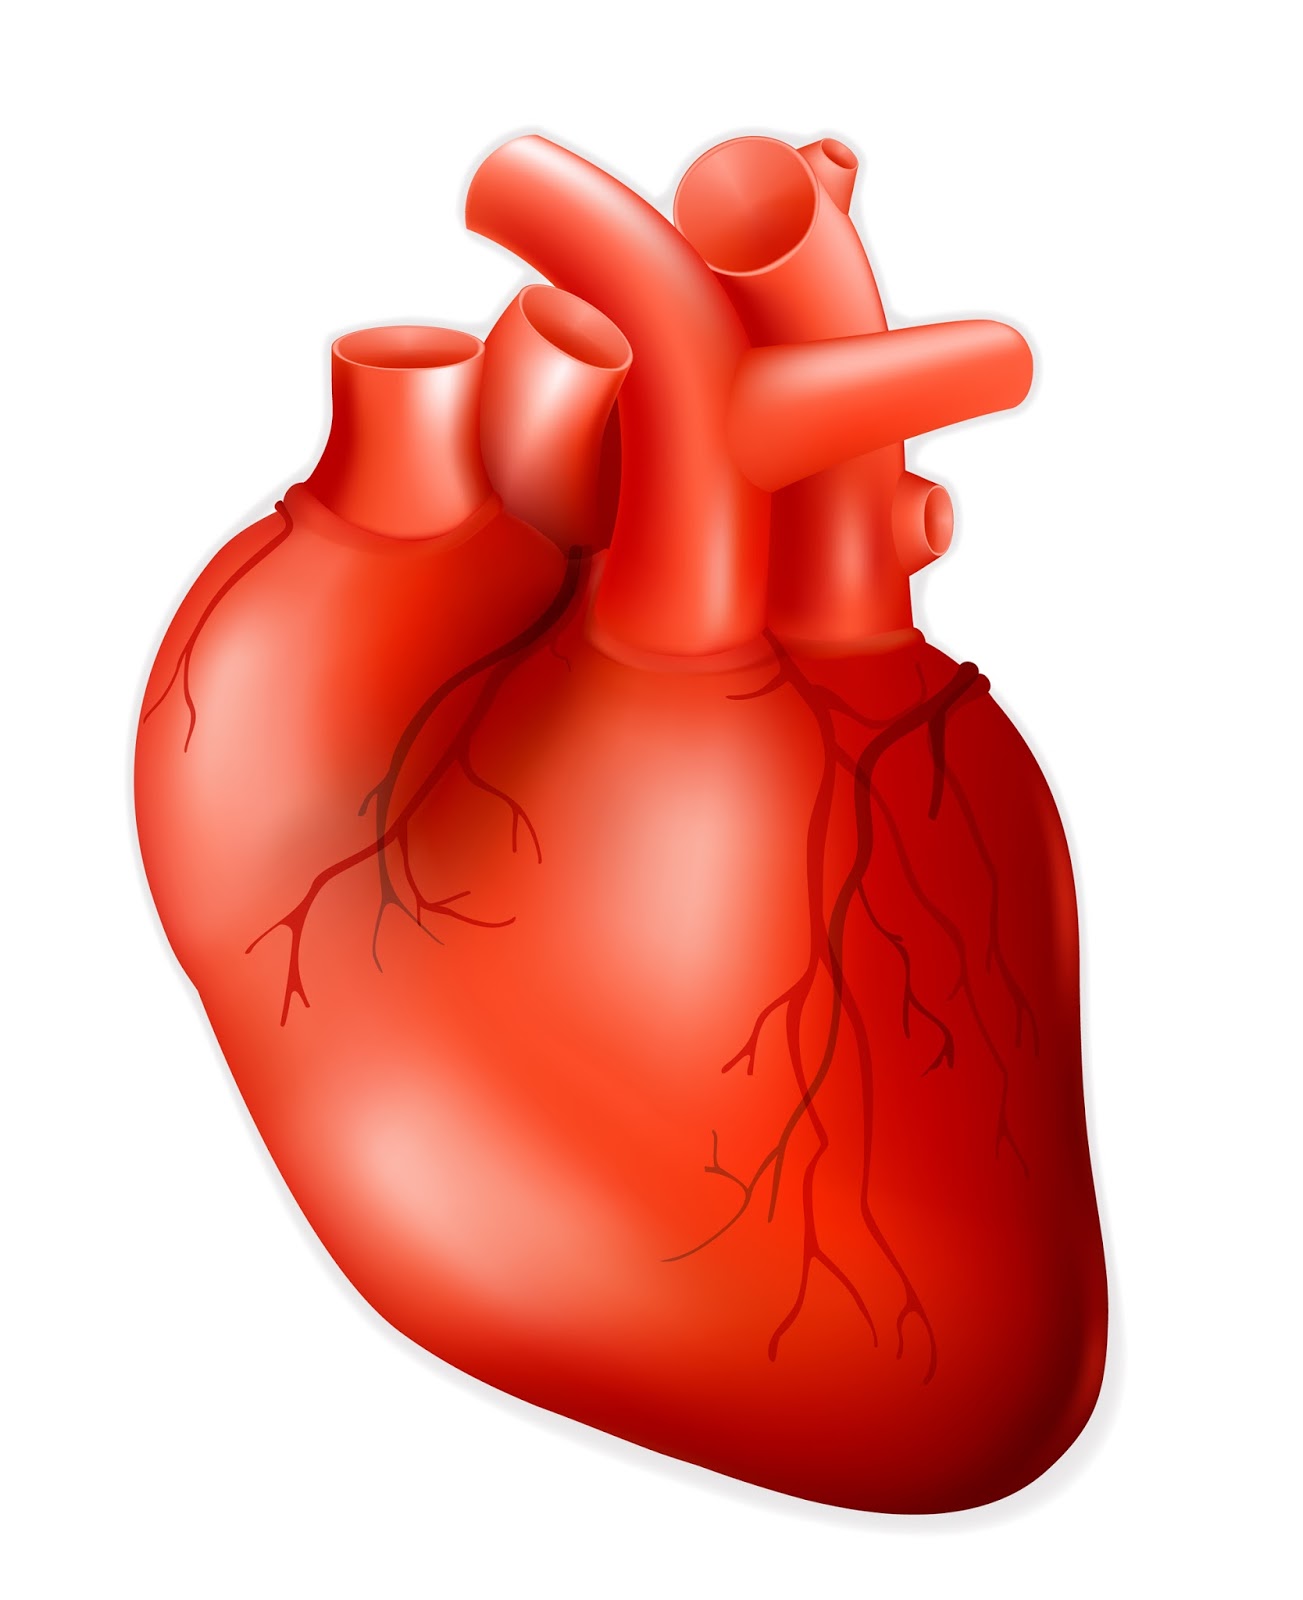 5+ Real Heart Clipart - Preview : Real Heart Clipar | HDClipartAll